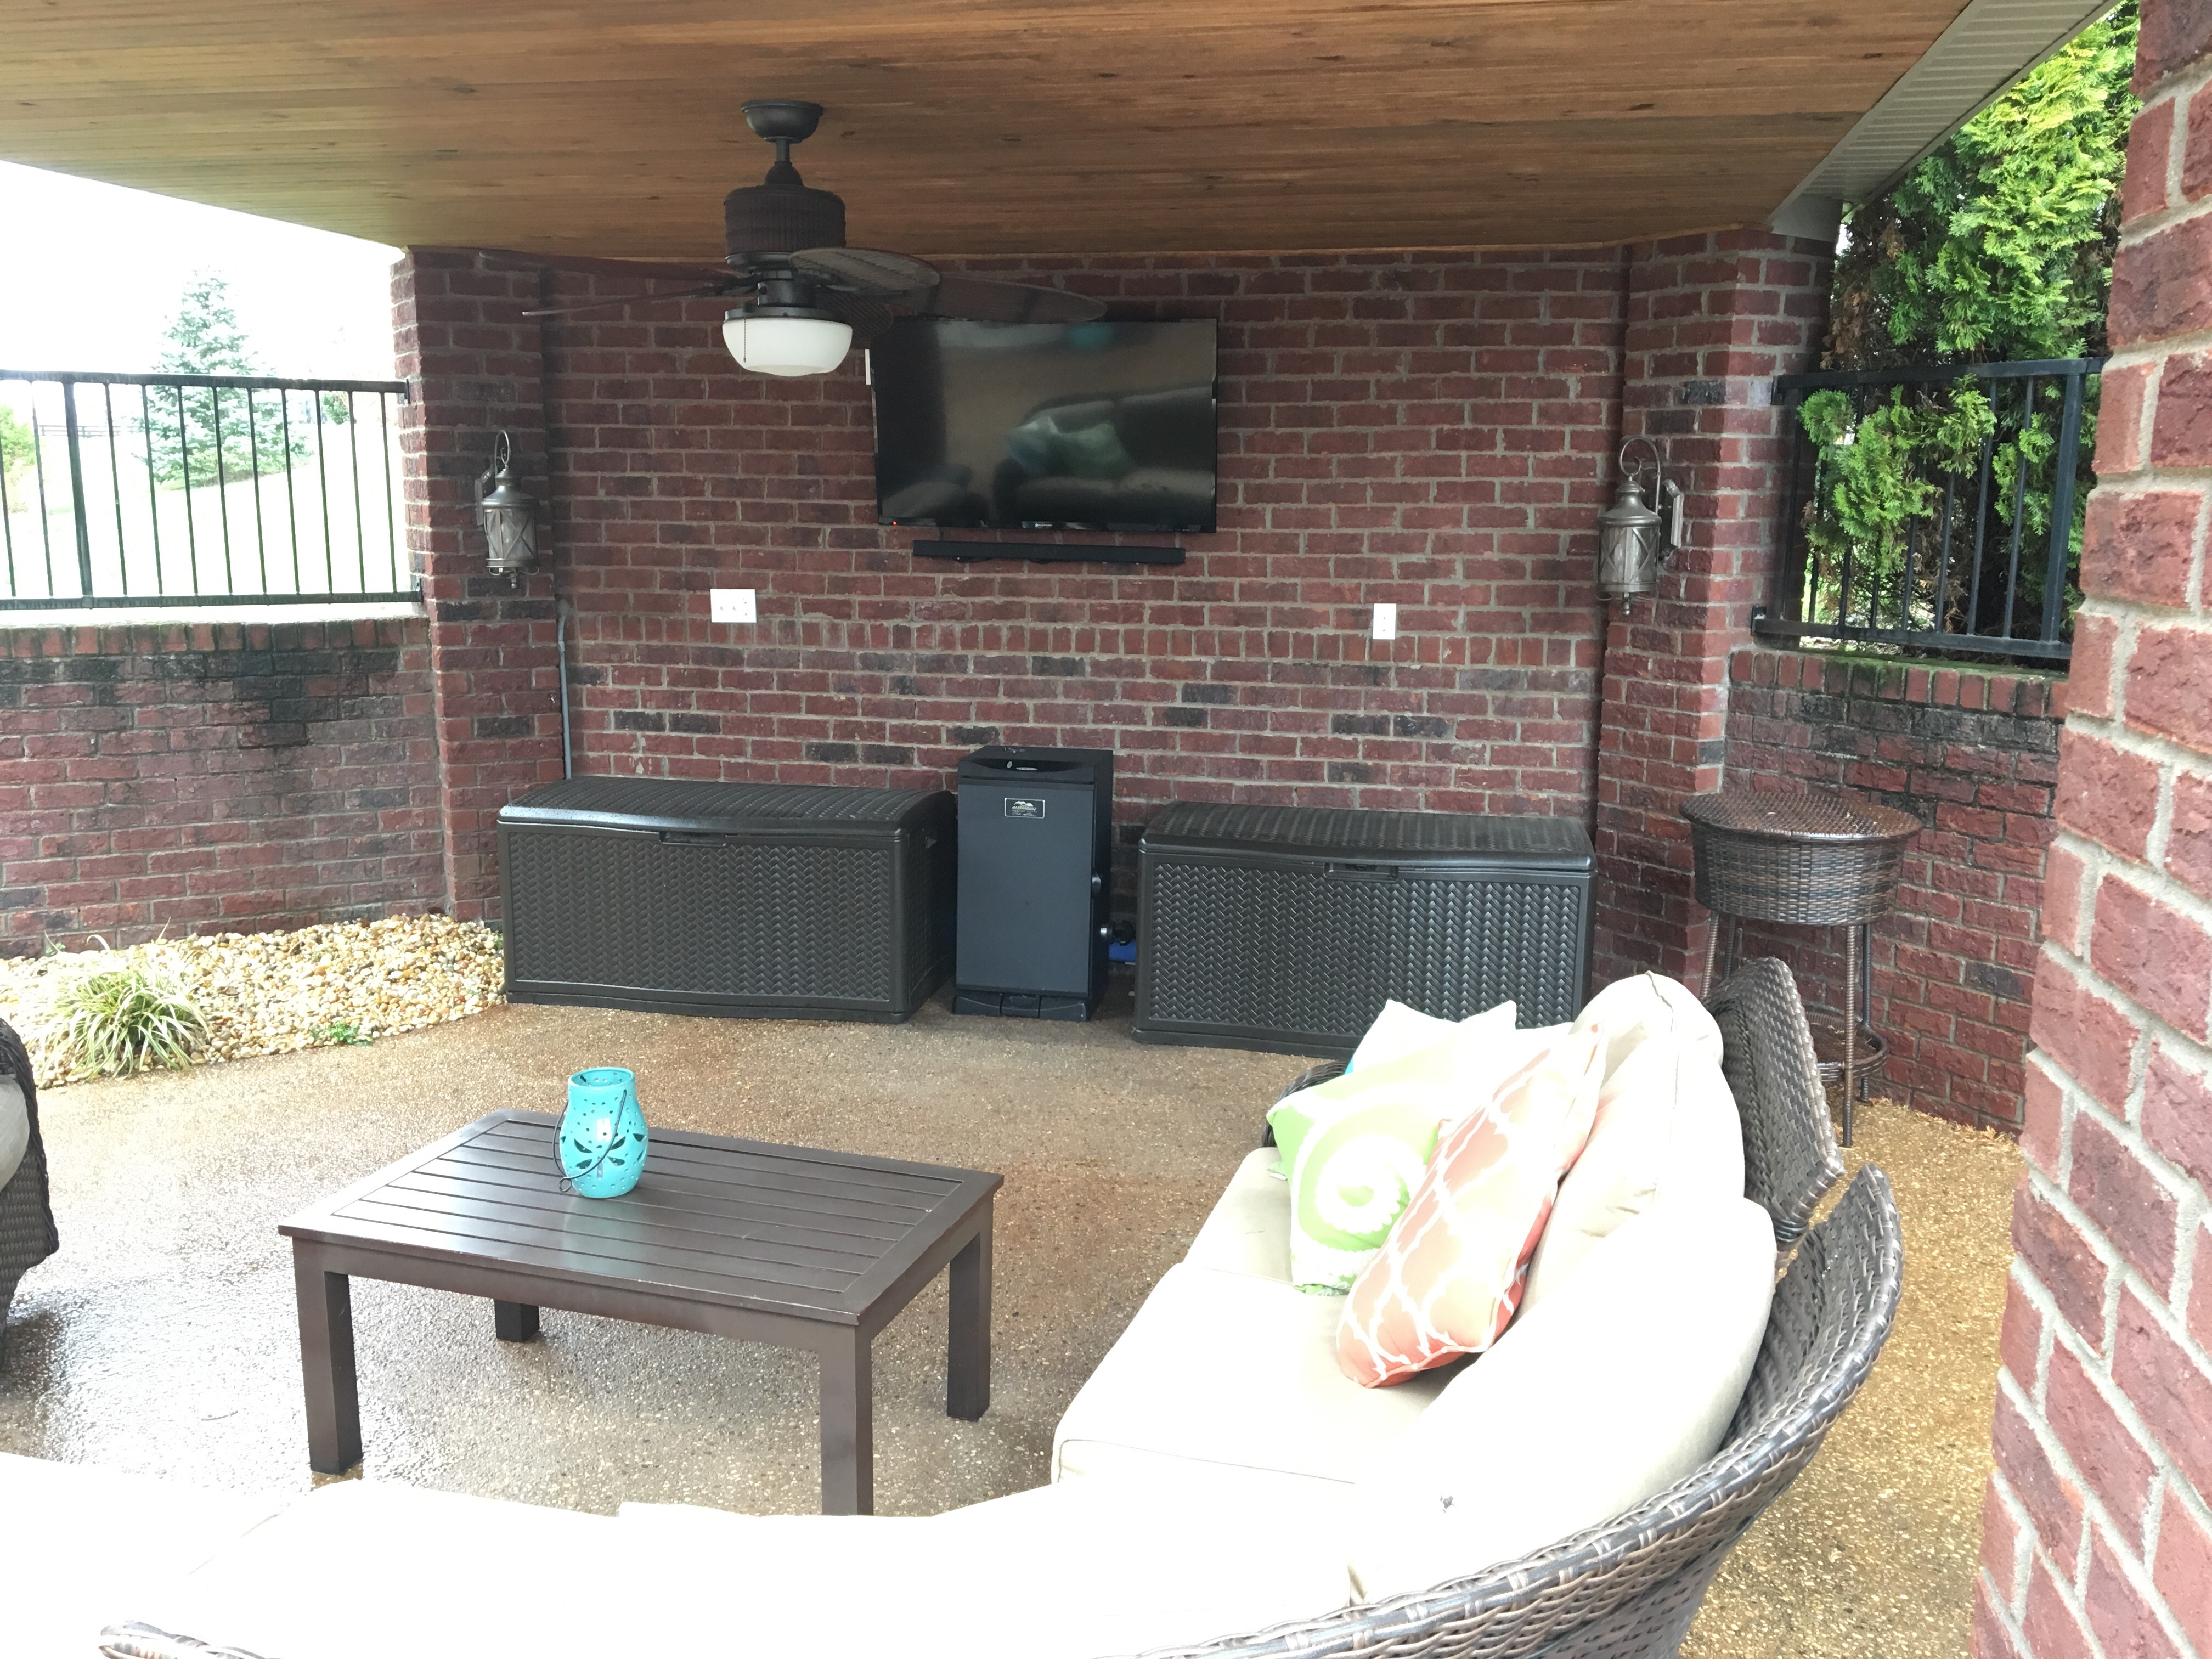 Installed a Samsung HW-K360 Sound Bar with Bluetooth subwoofer, turning this outdoor patio into and an entertainment oasis.